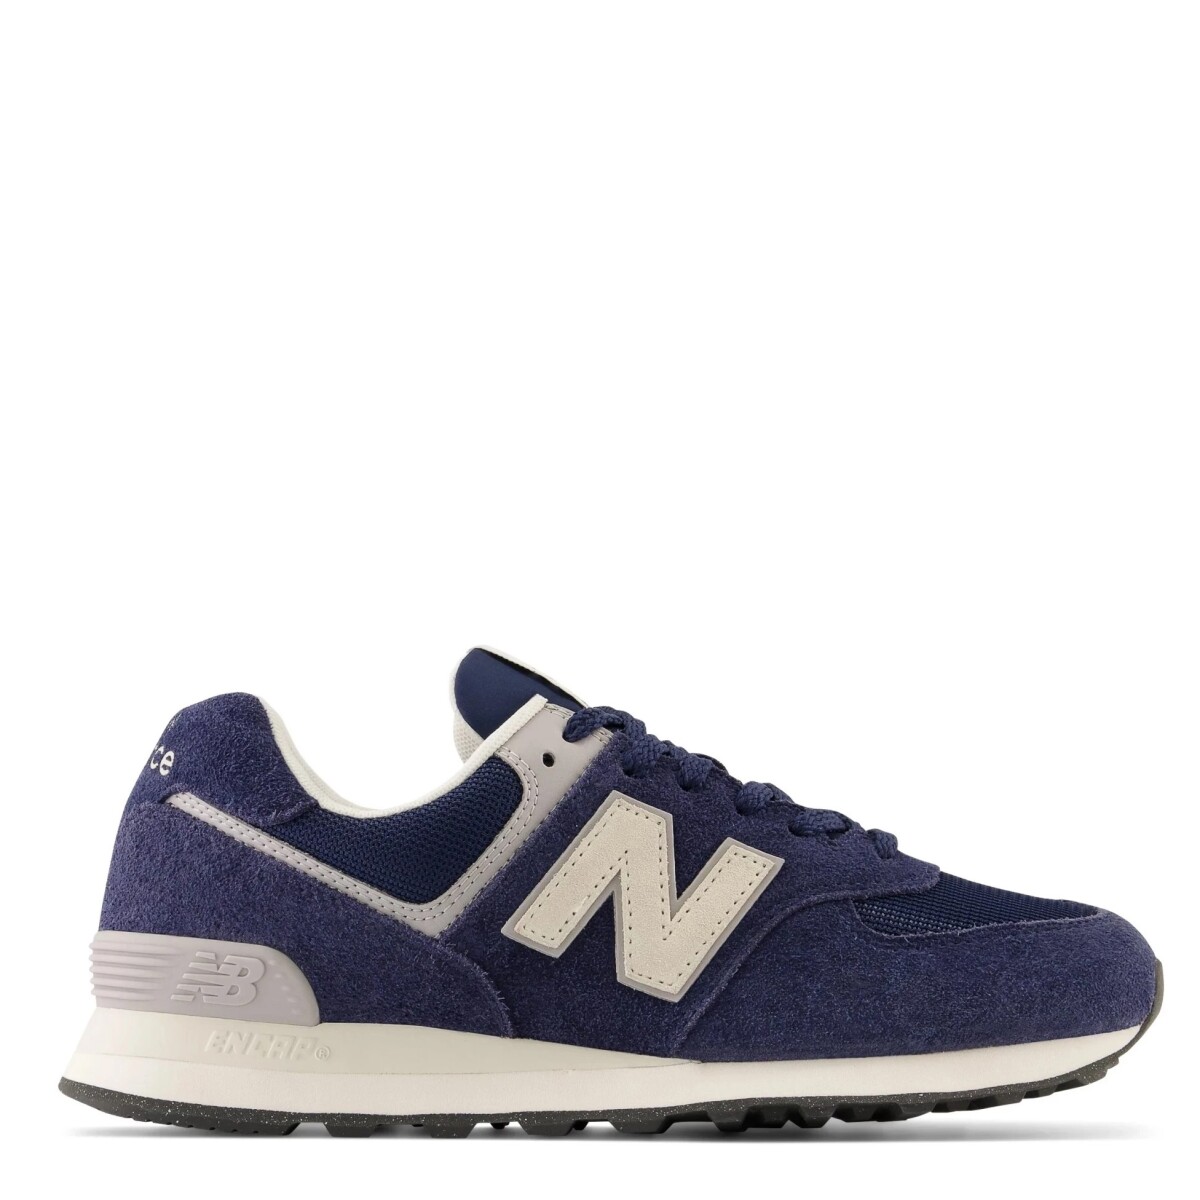 Classic Traditionnels New Balance - Navy/Beige 